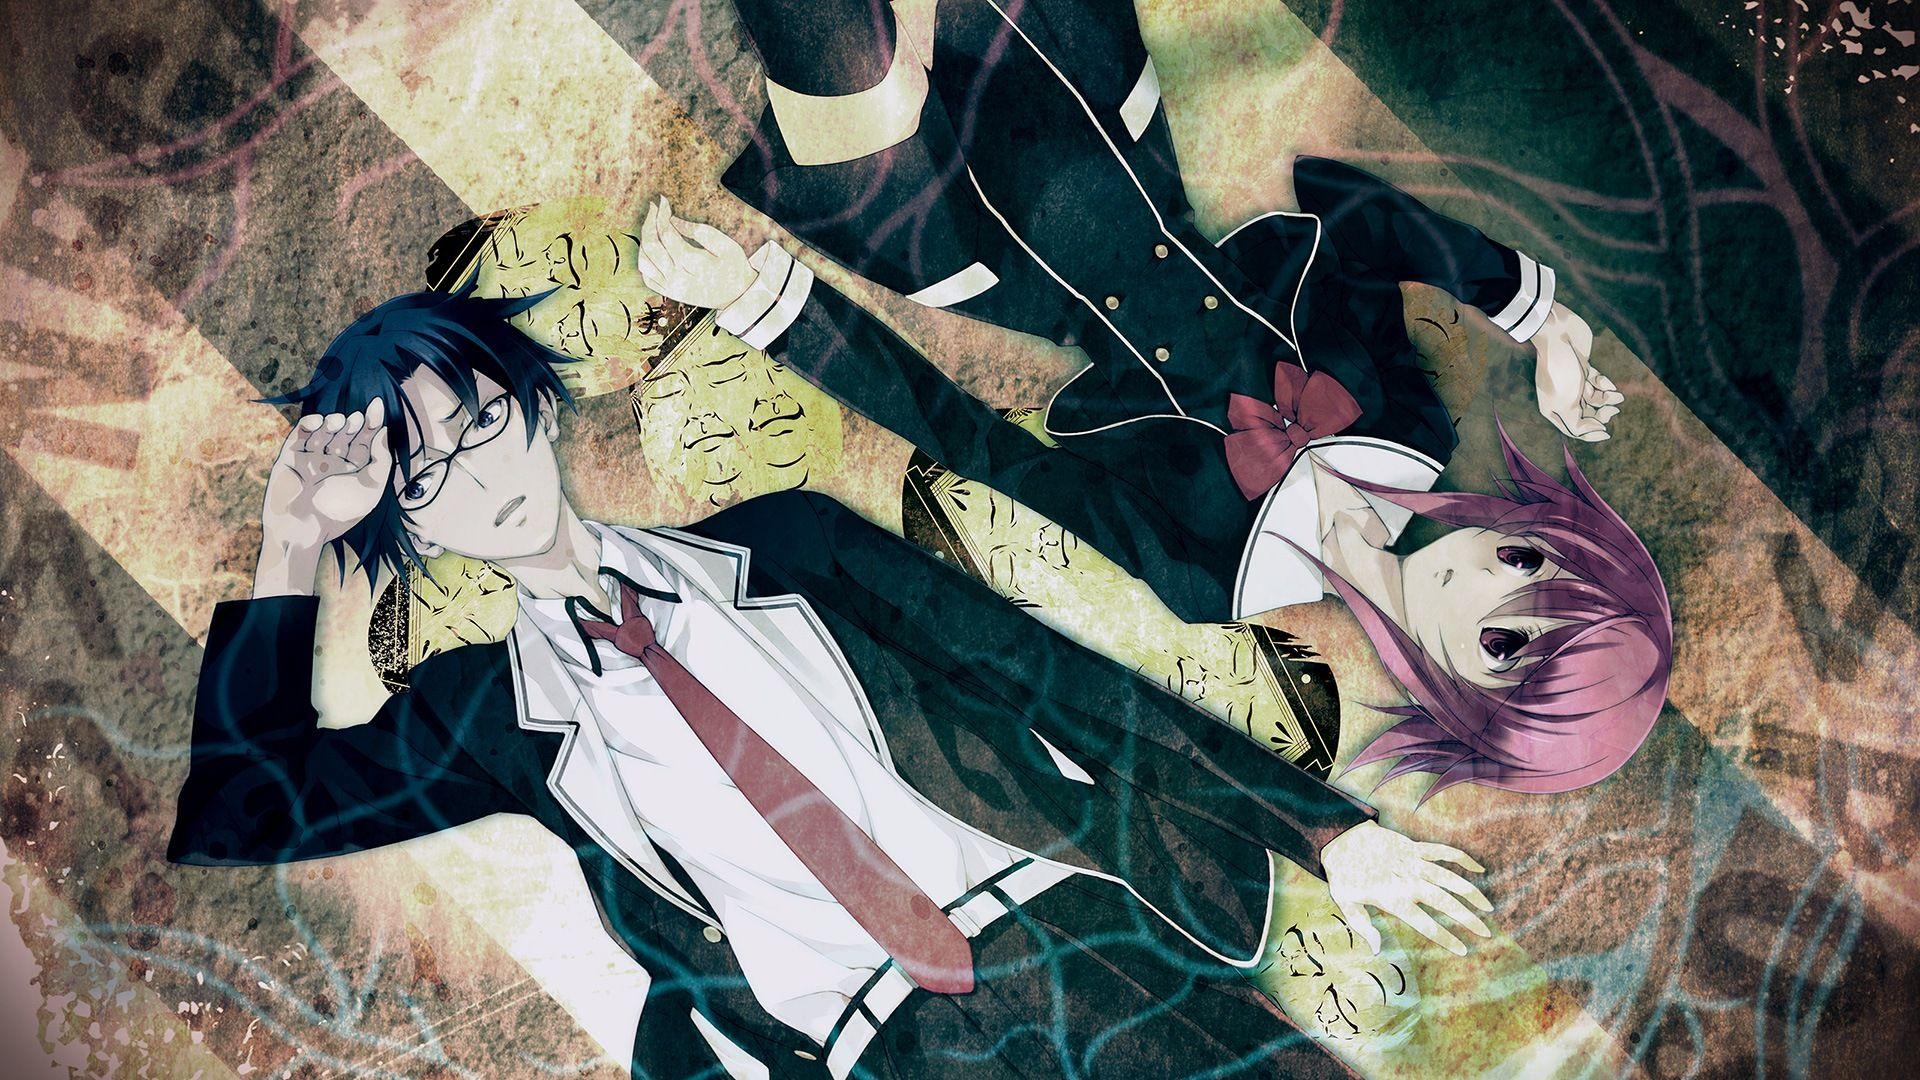 Amazon Germany lists Chaos;Child for PS PS Vita